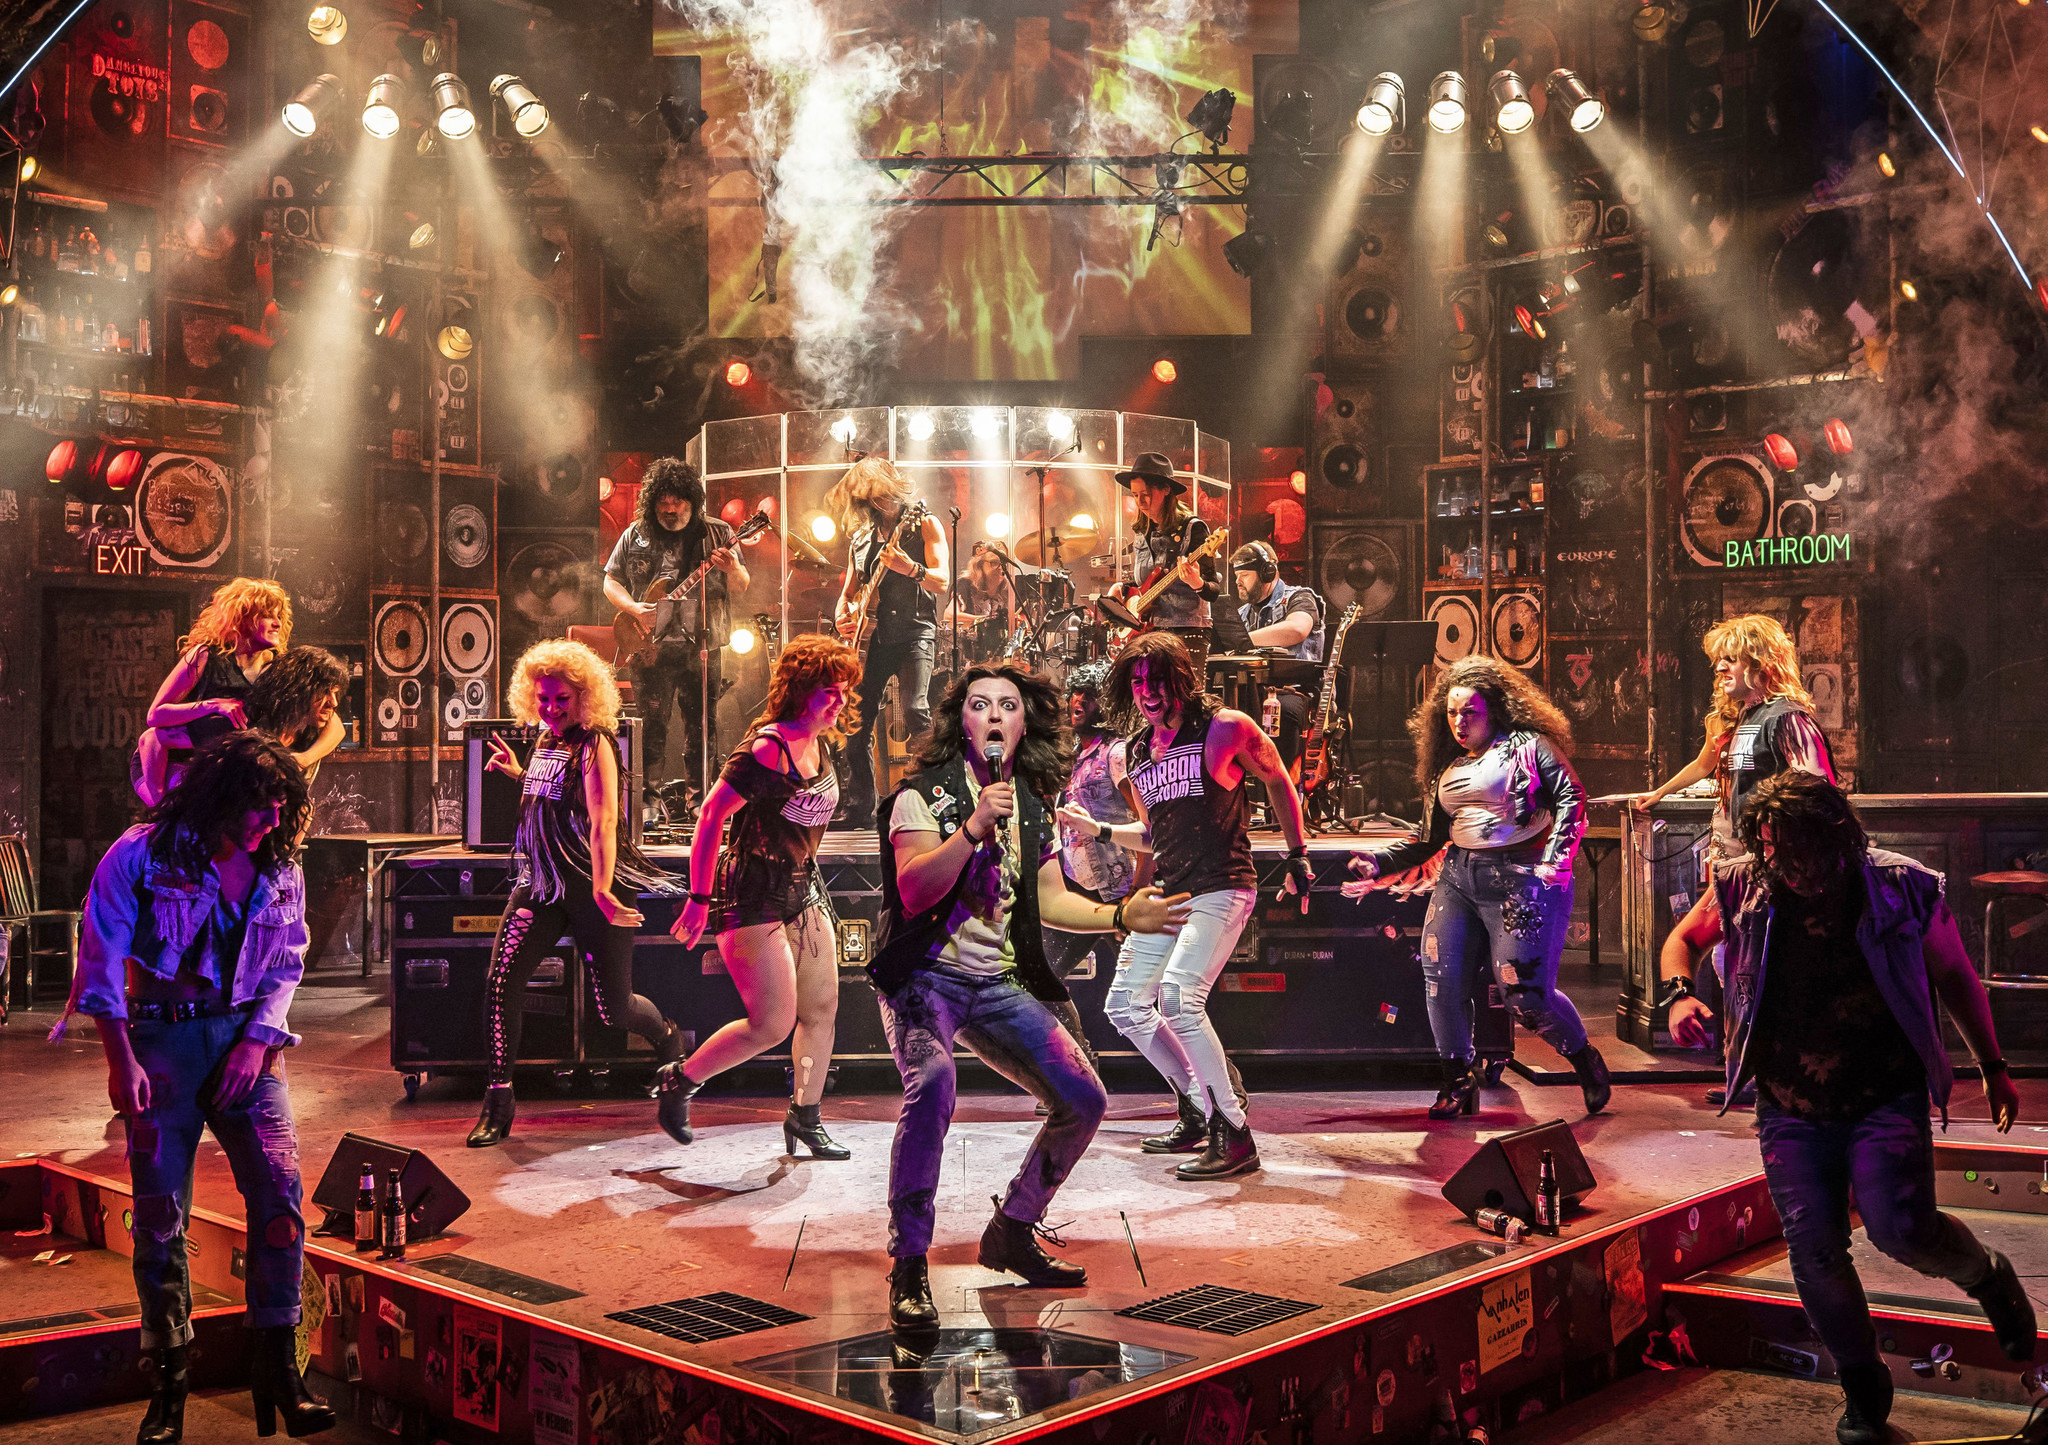 Rock of Ages  Theater in New York